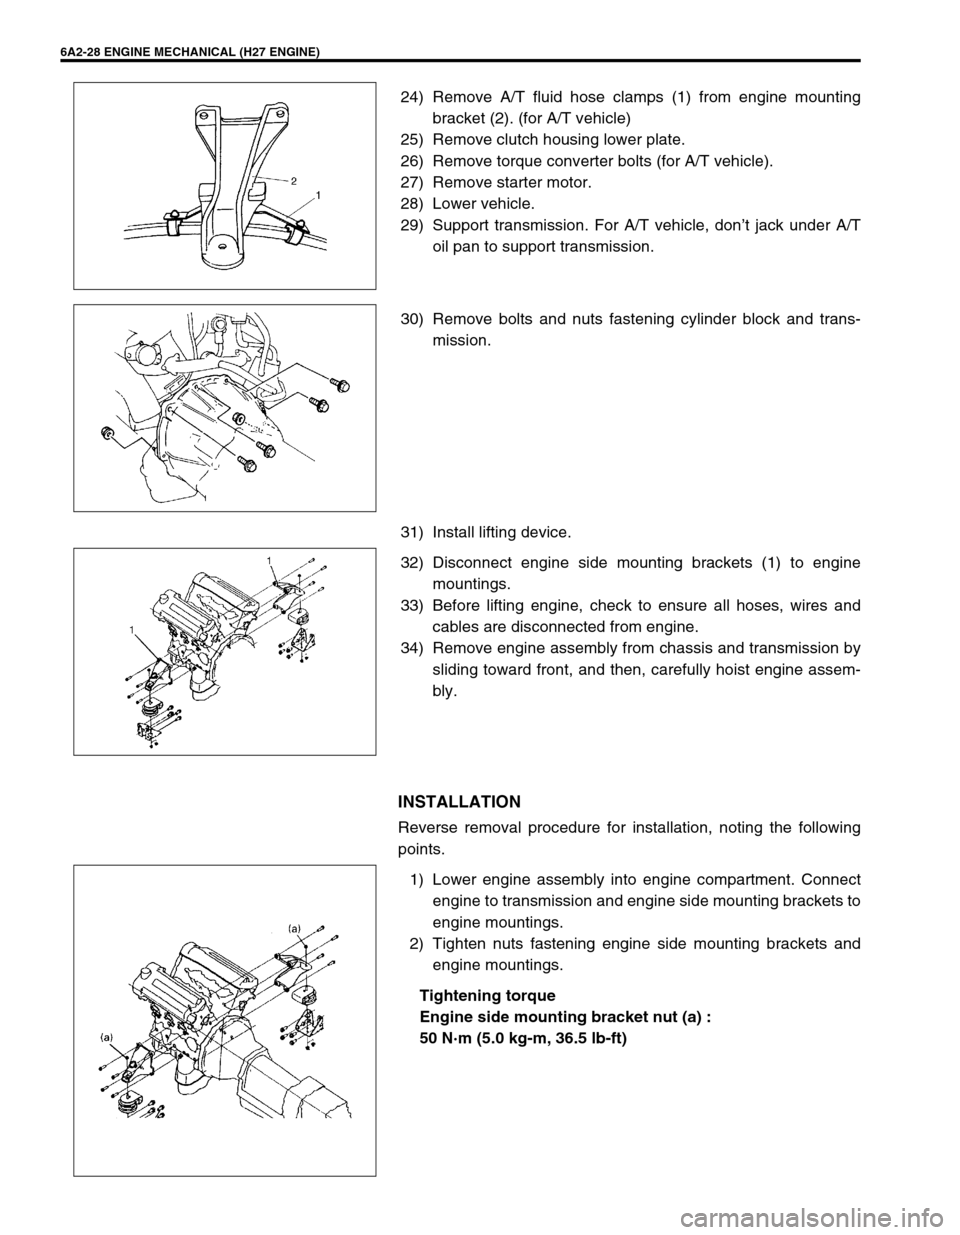 SUZUKI GRAND VITARA 2001 2.G Owners Manual 6A2-28 ENGINE MECHANICAL (H27 ENGINE)
24) Remove A/T fluid hose clamps (1) from engine mounting
bracket (2). (for A/T vehicle)
25) Remove clutch housing lower plate.
26) Remove torque converter bolts 